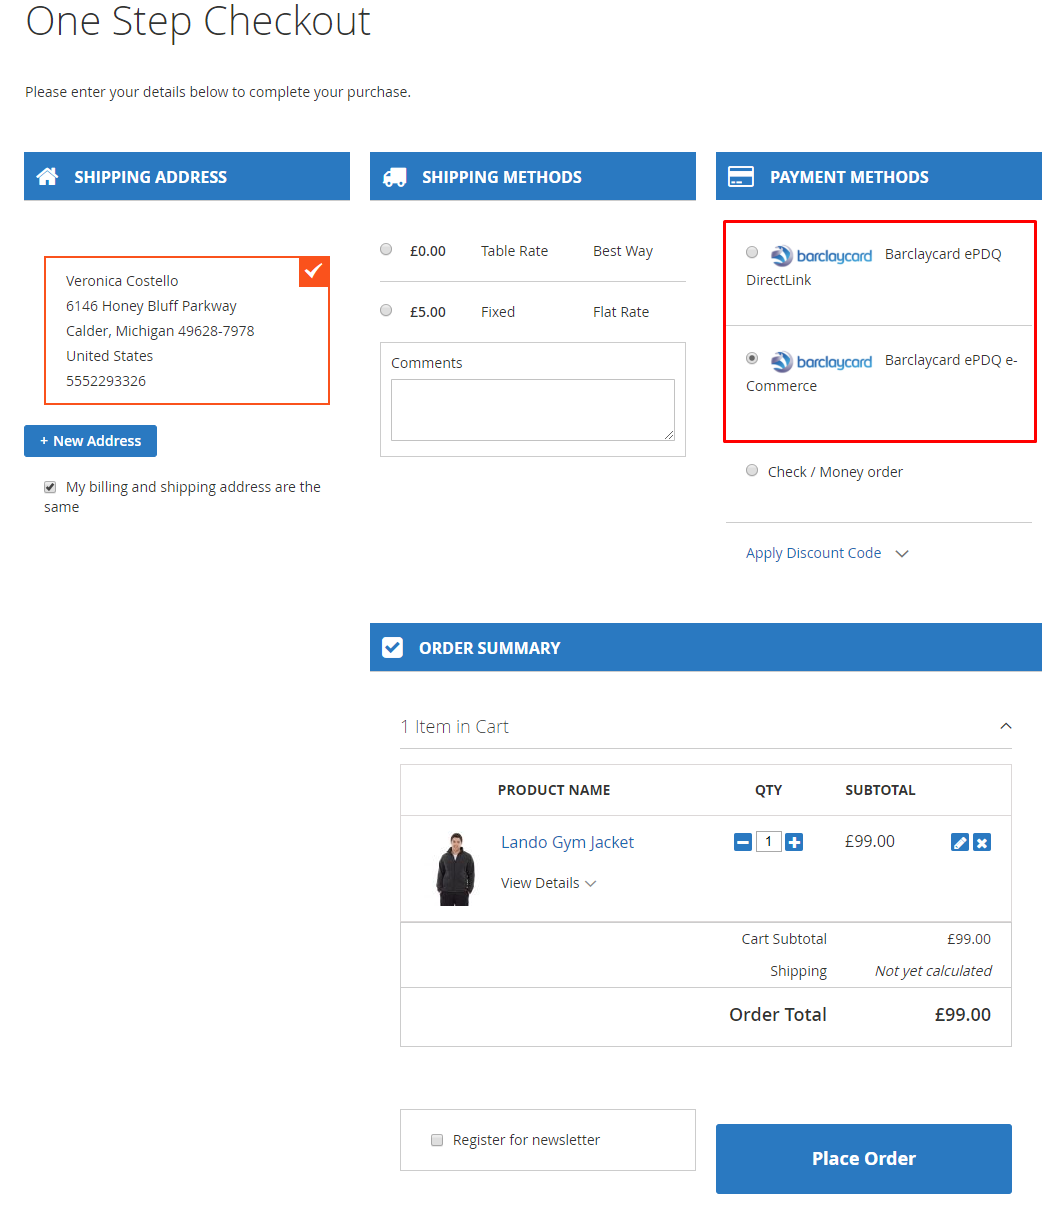 magento 2 Barclaycard extension